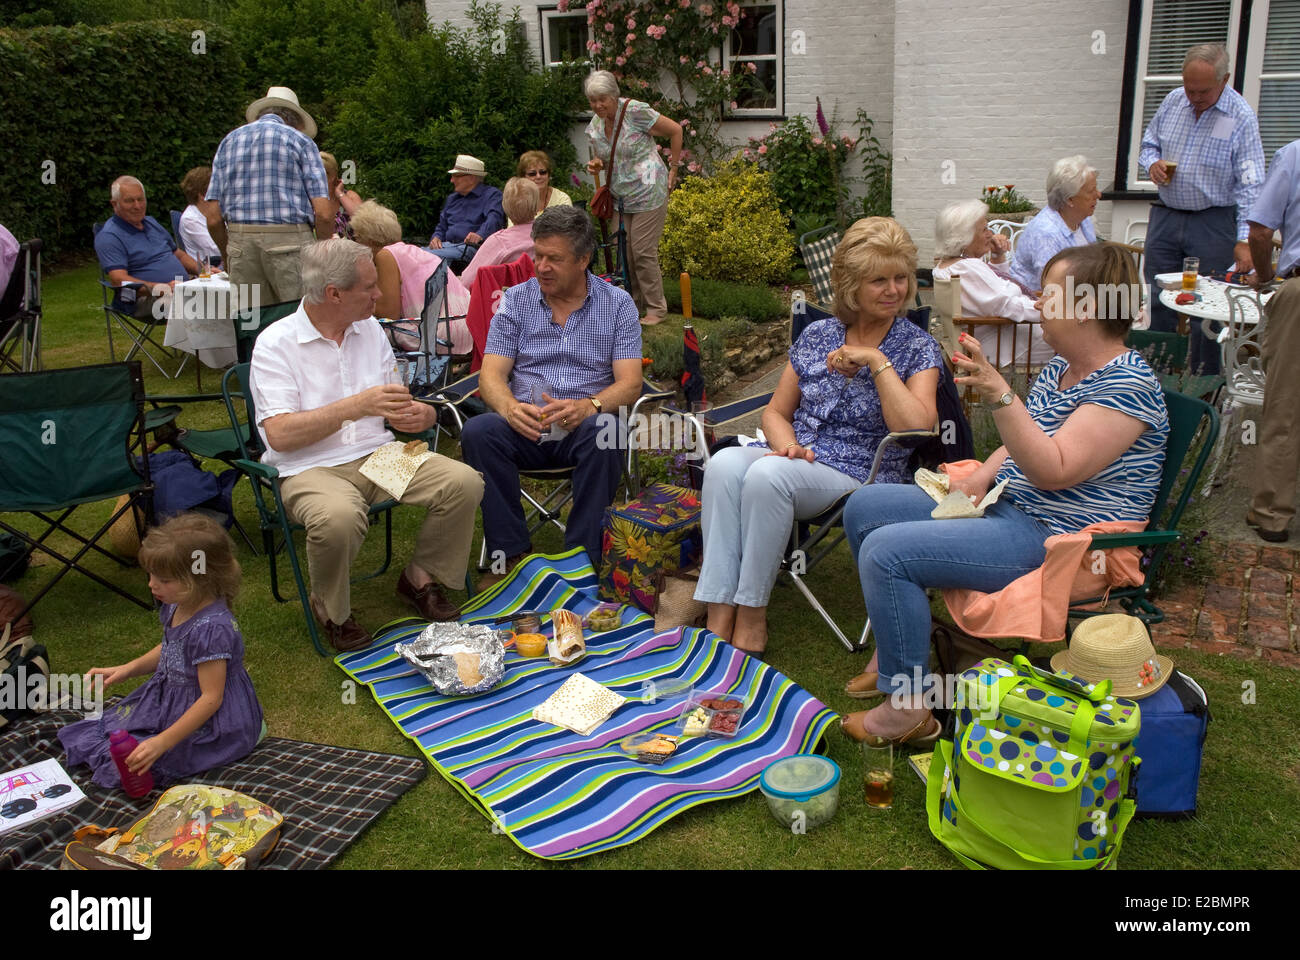 Group of people enjoying a picnic and drinks at a summer garden party, Standford, Hampshire, UK. Stock Photo